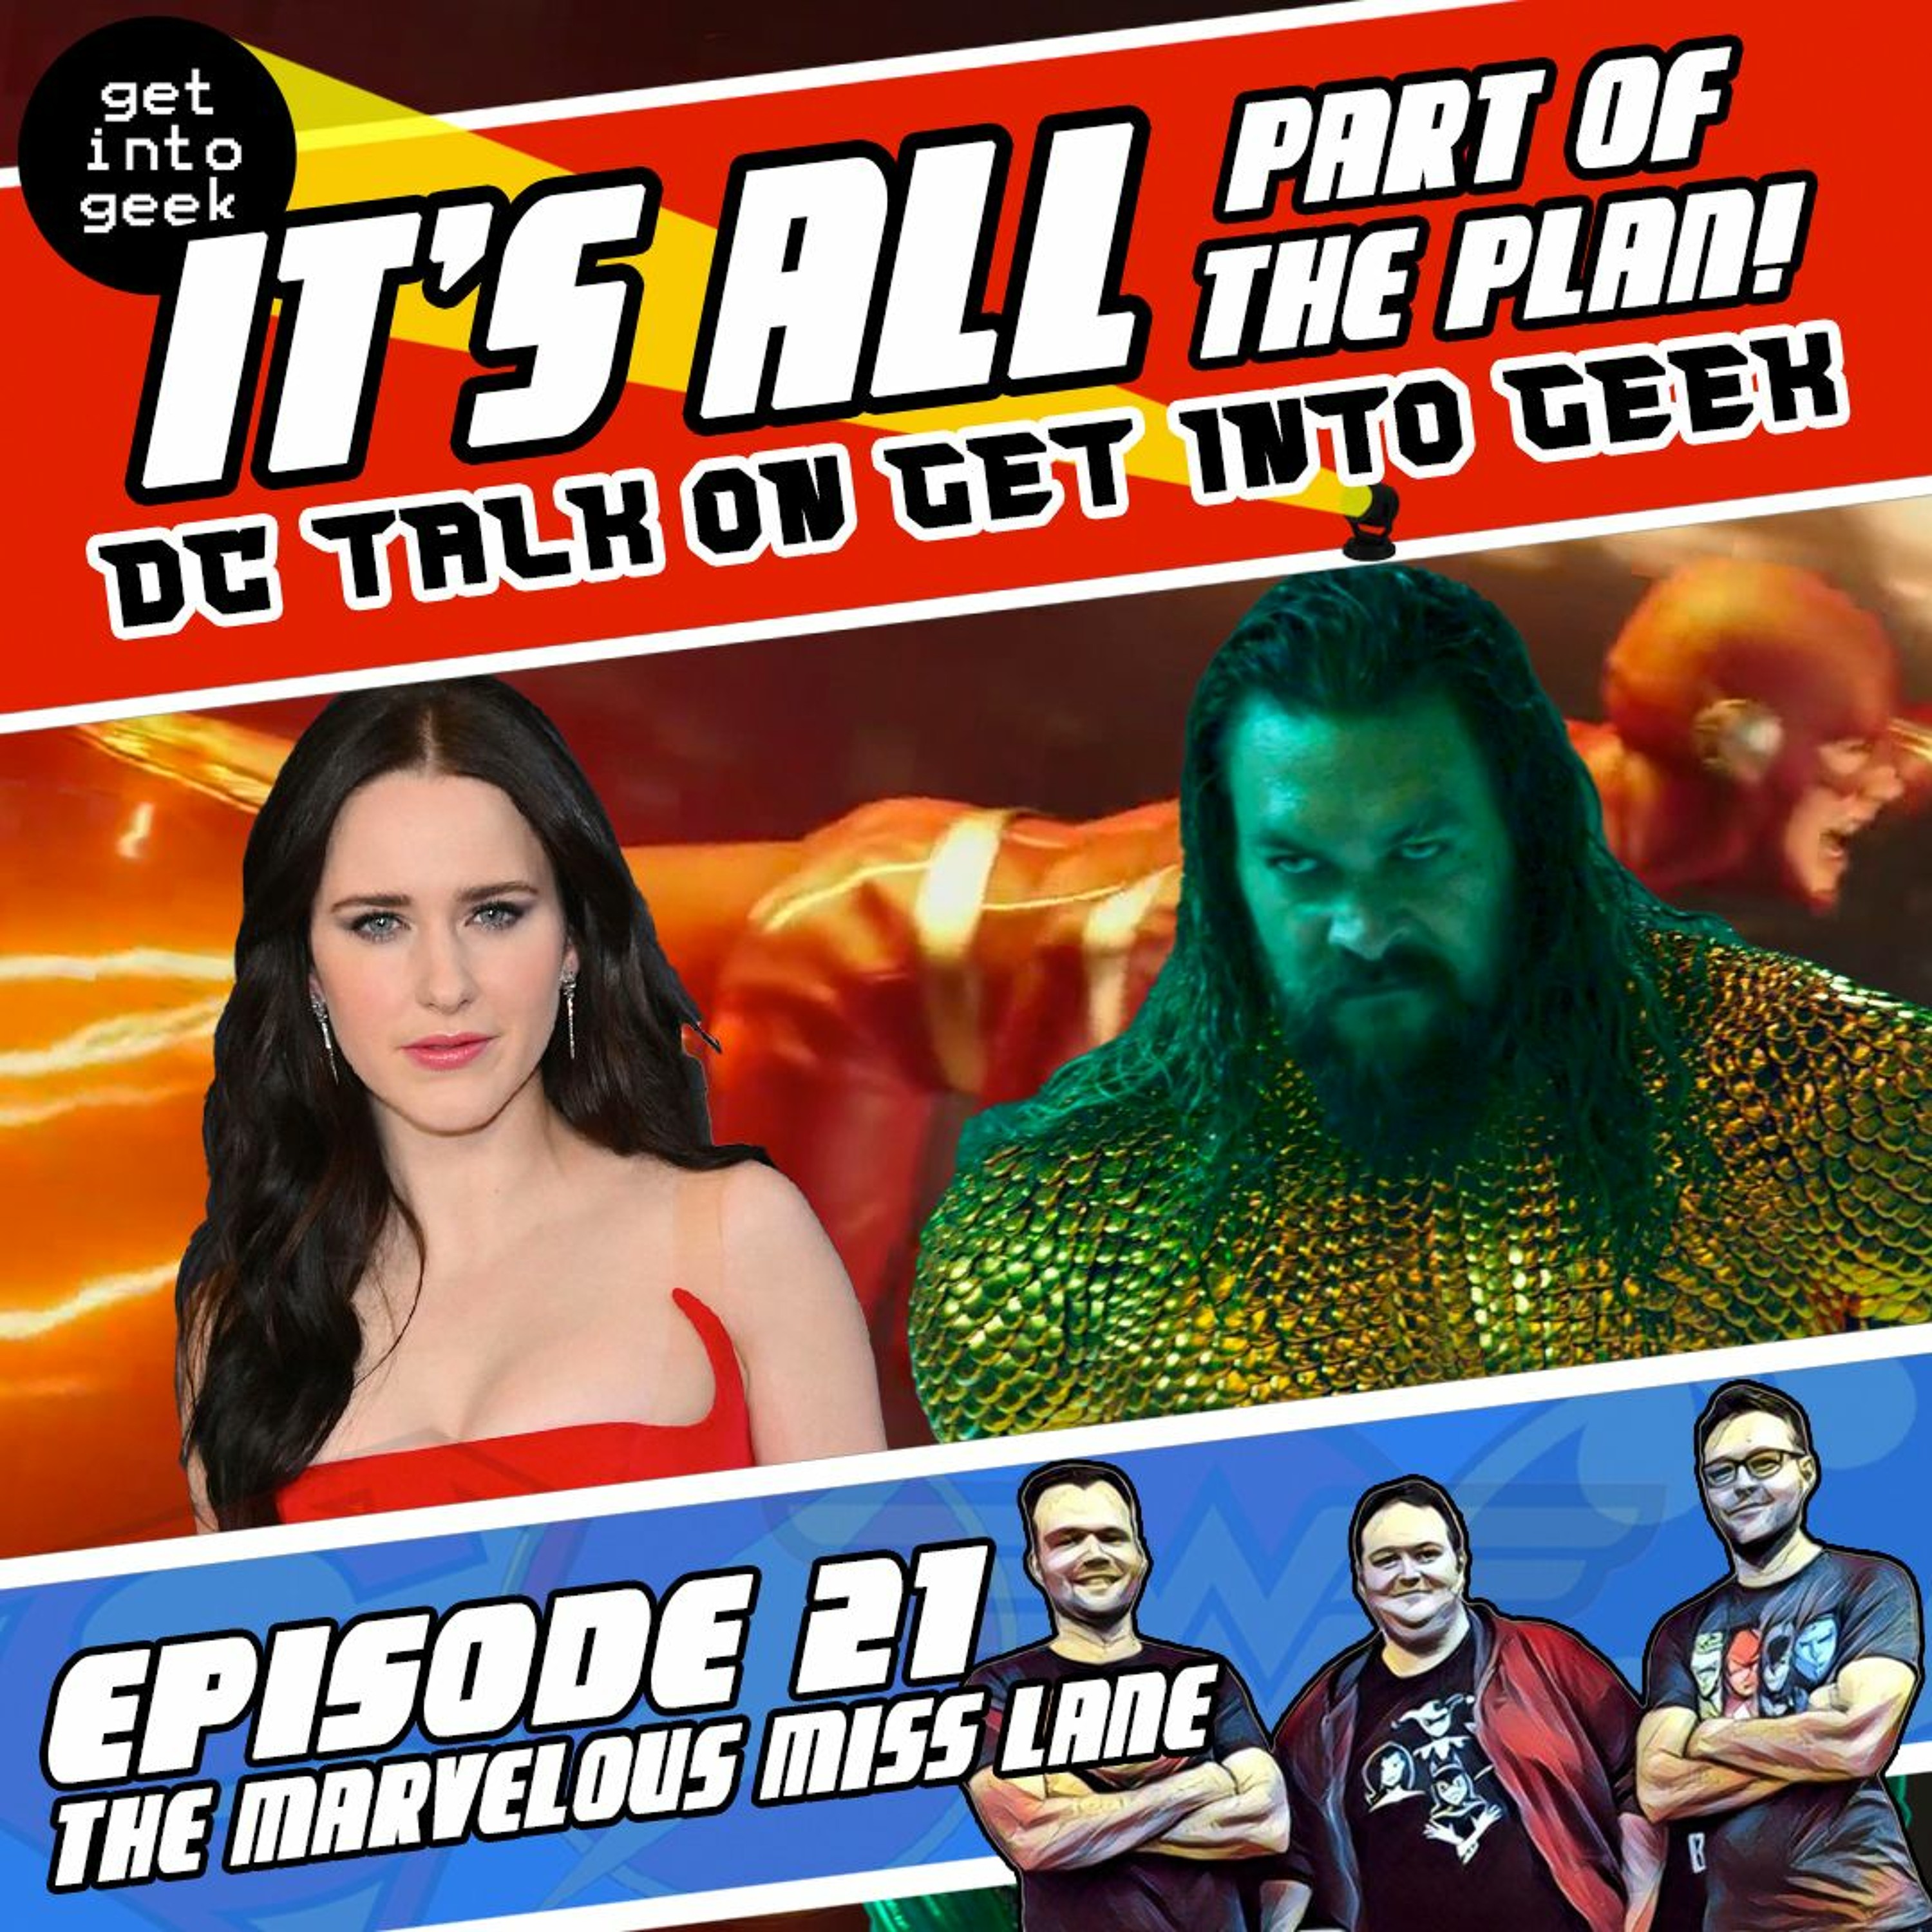 The Marvelous Miss Lane (It's All Part Of The Plan - DC Talk Episode 1.21)